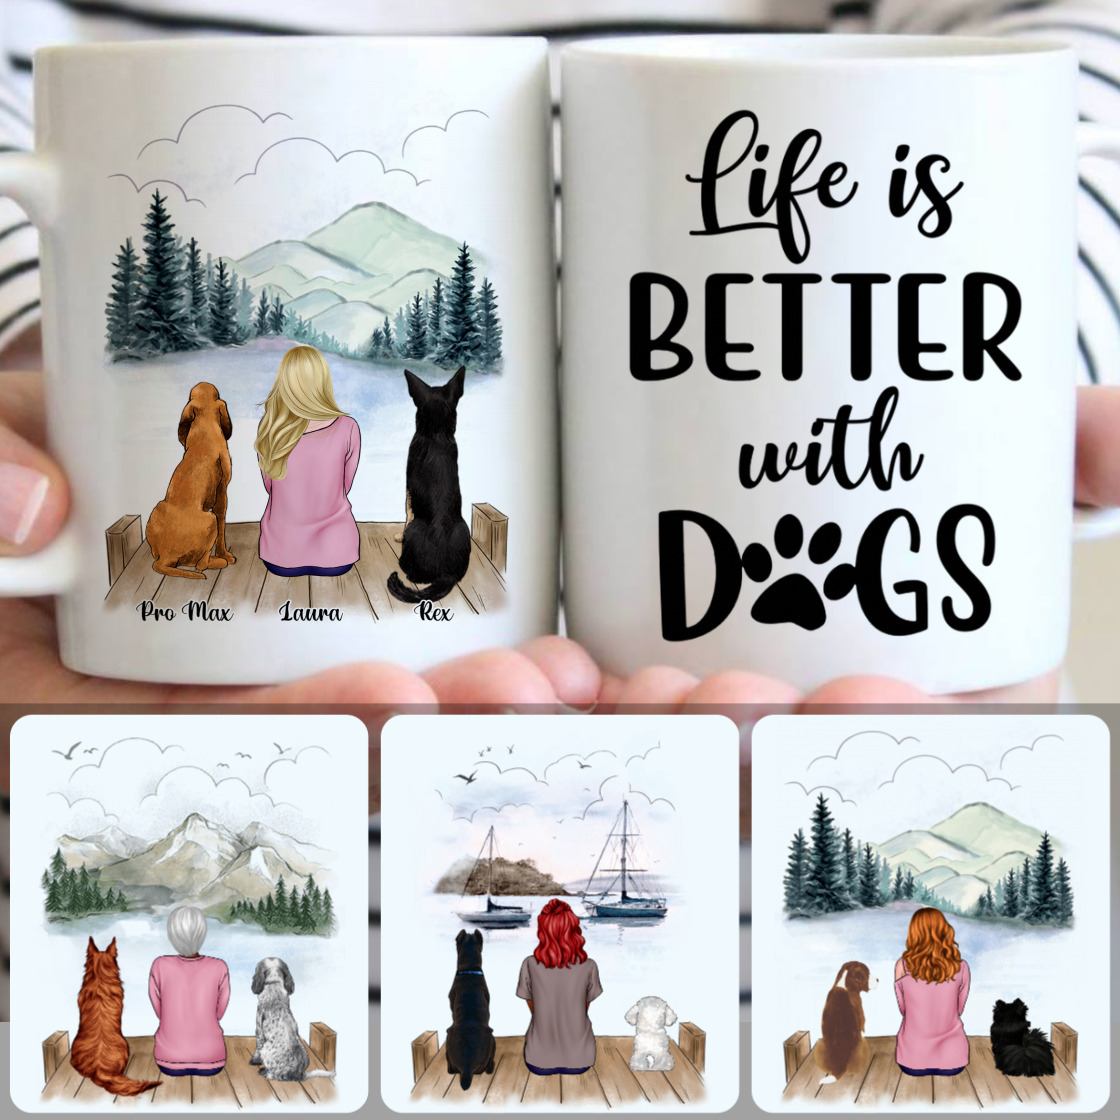 Personalized Mug, Meaningful Gifts For Mother In Law, Girl & 2 Dogs Customized Coffee Mug With Names